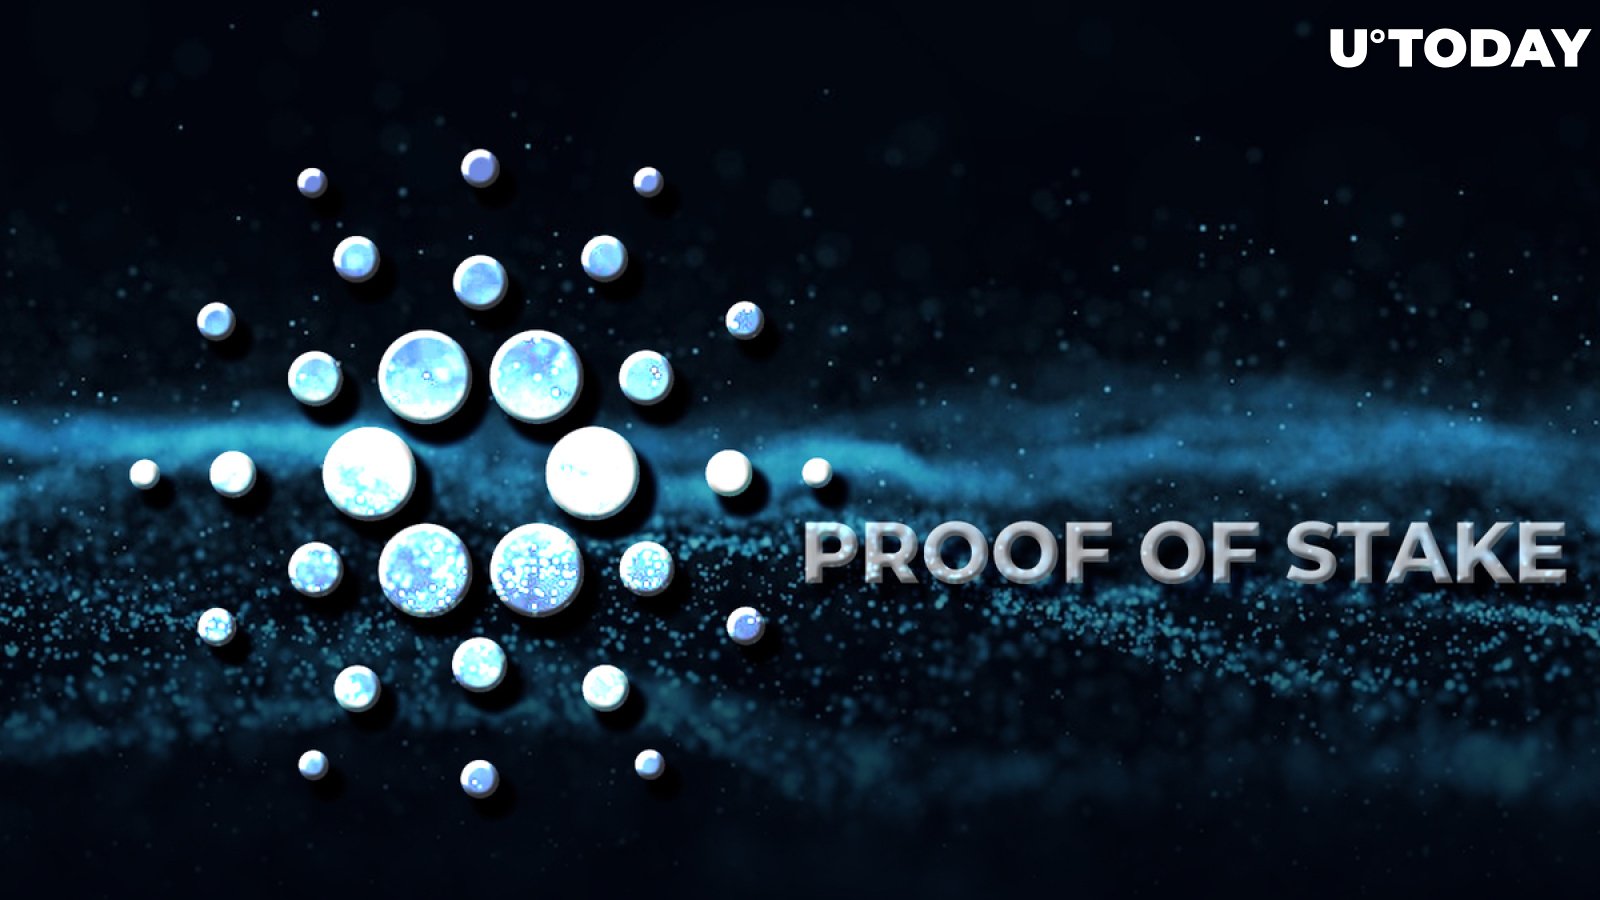 Cardano Outperforms Current Proof-of-stake Chains: Report